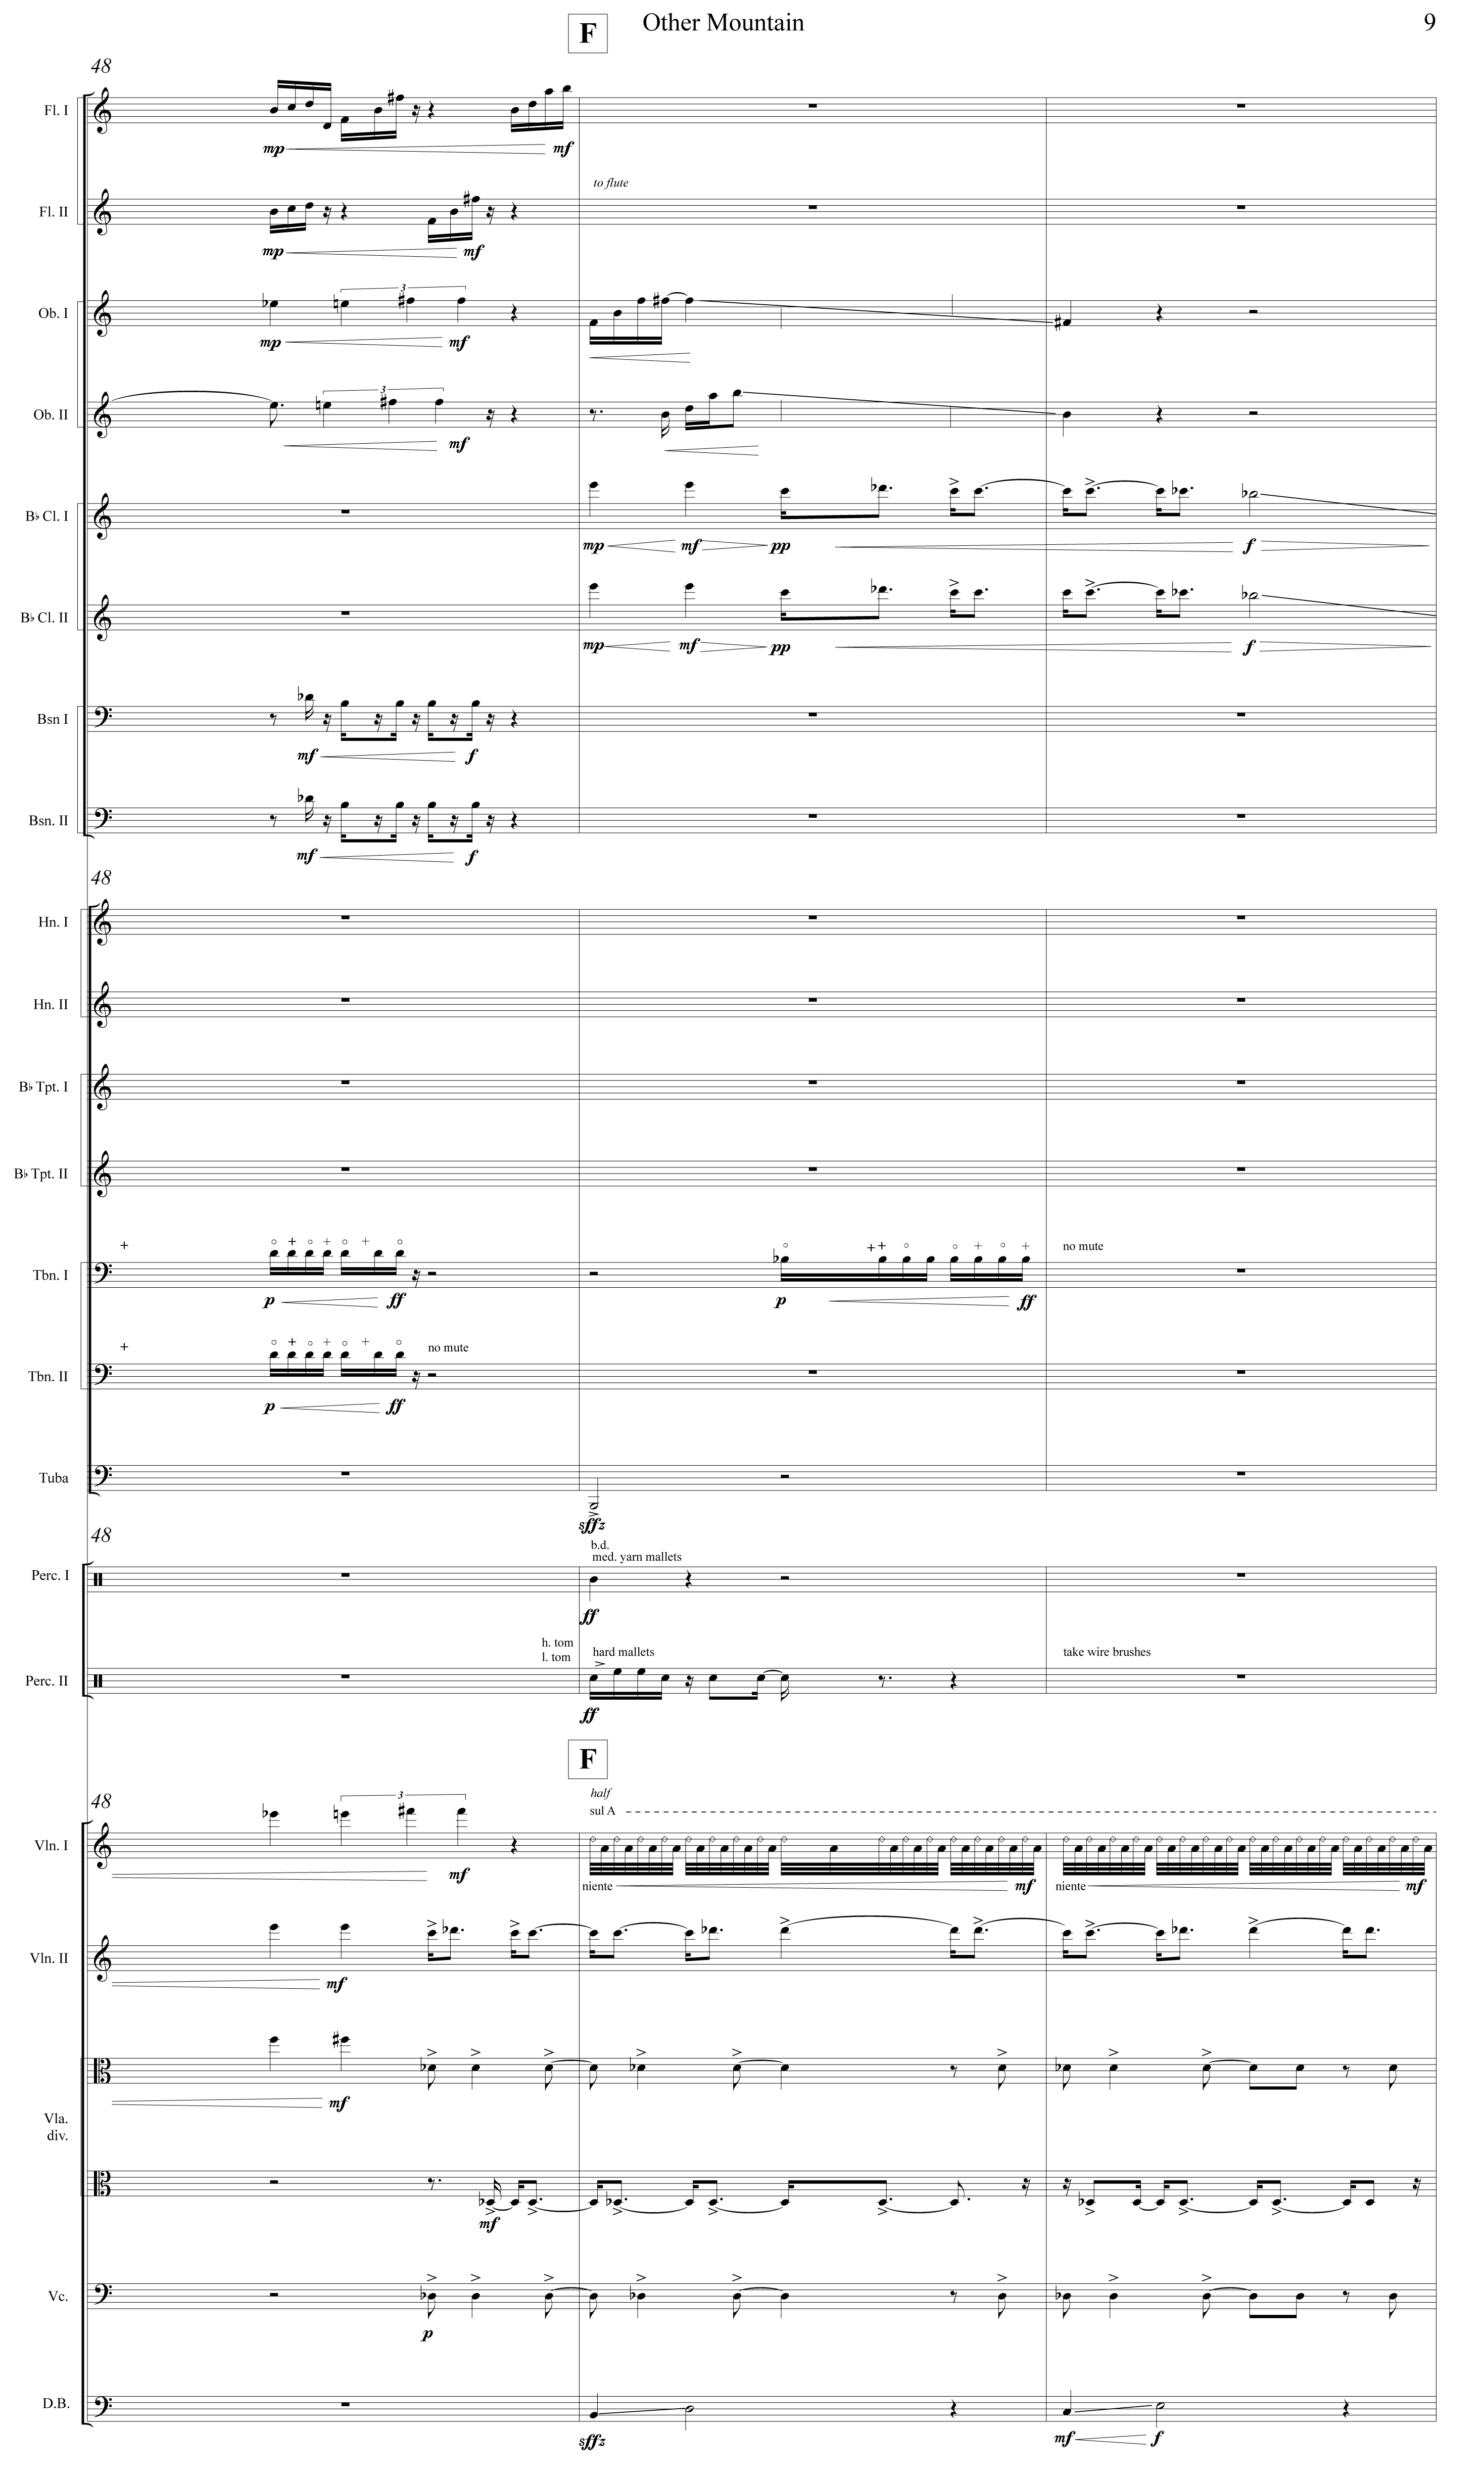 Other Mountain orchestral score excerpt